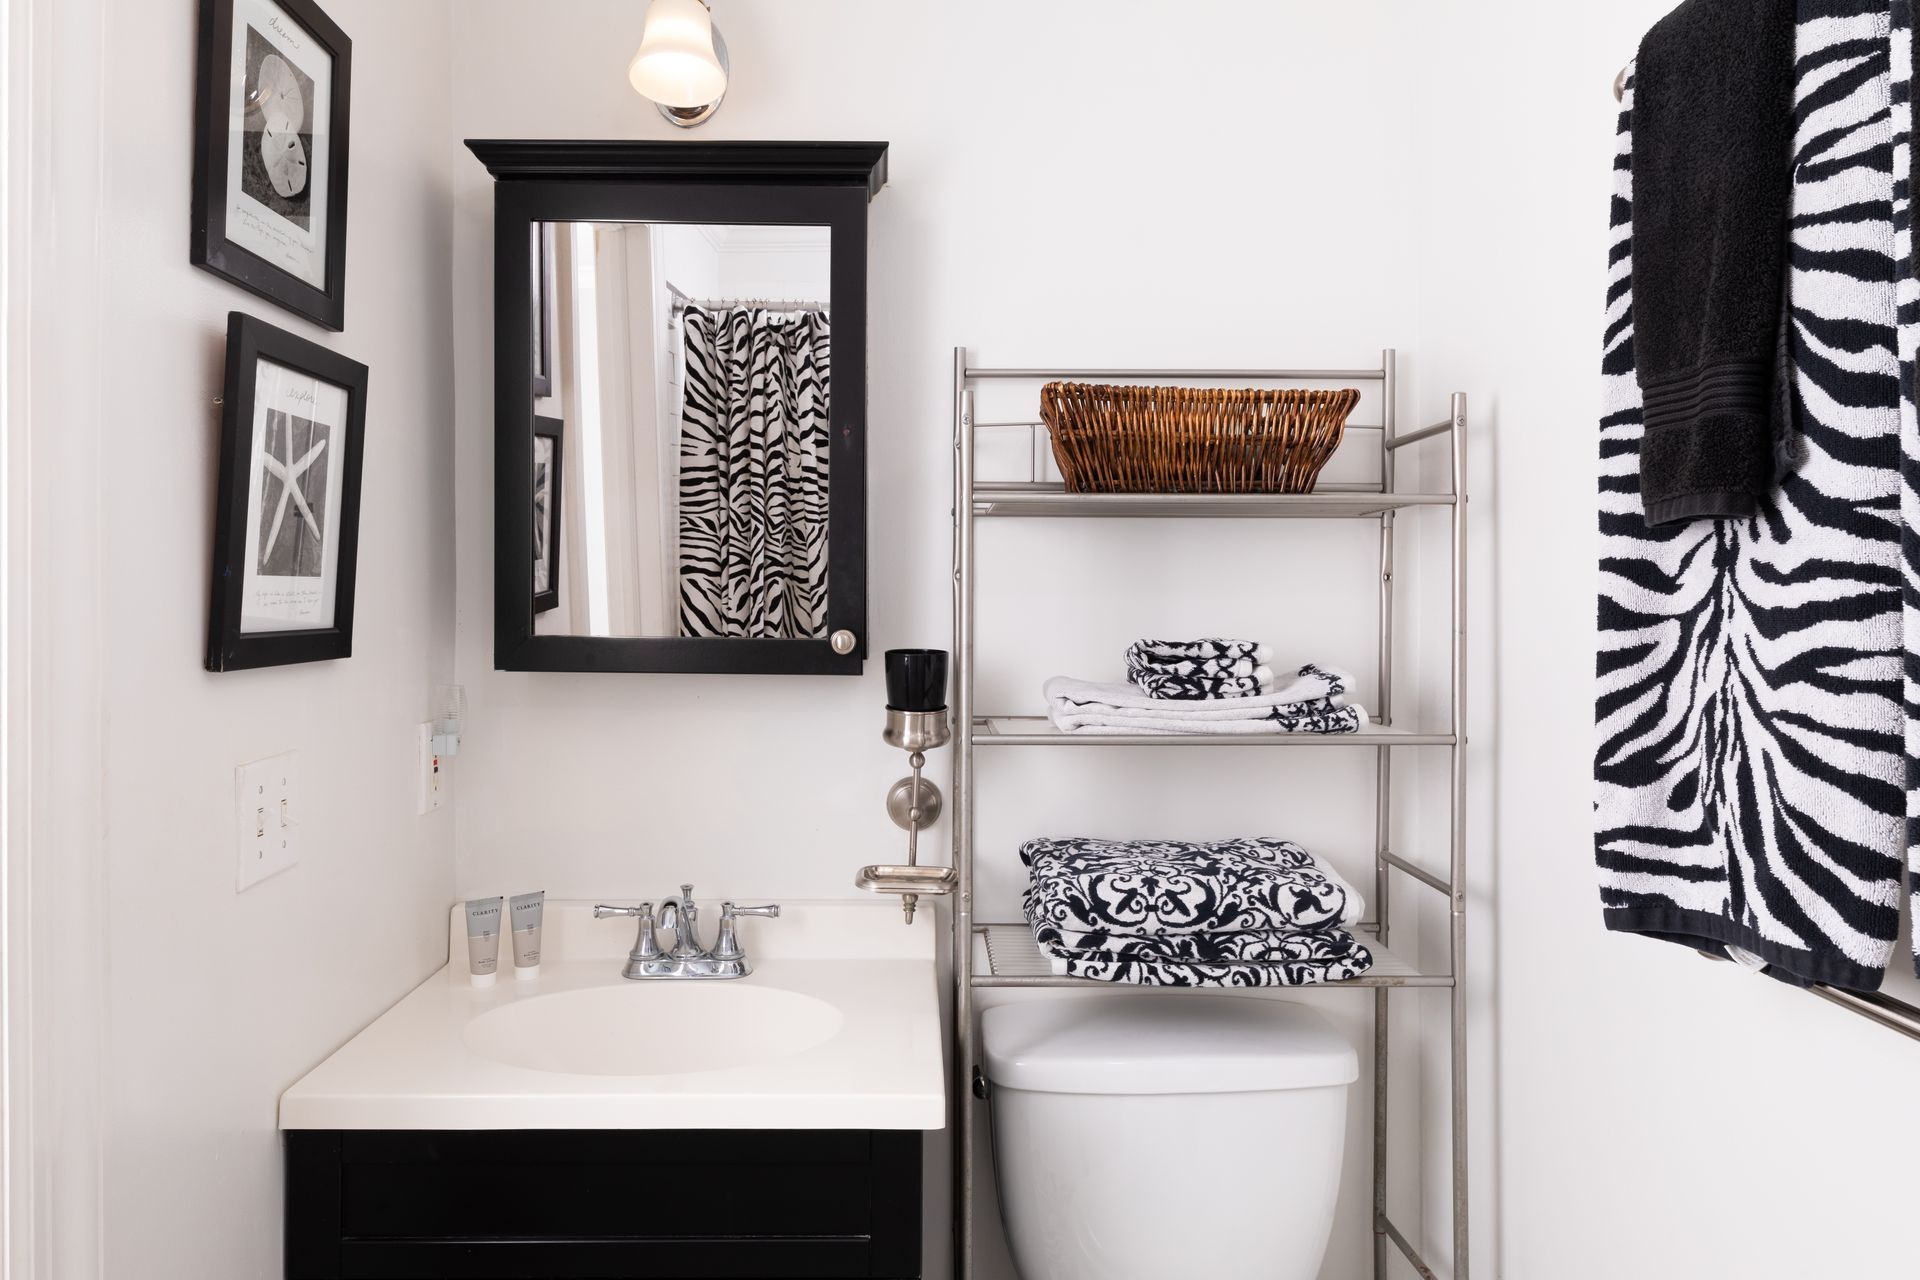 A bathroom with a toilet , sink , mirror and zebra print towels.